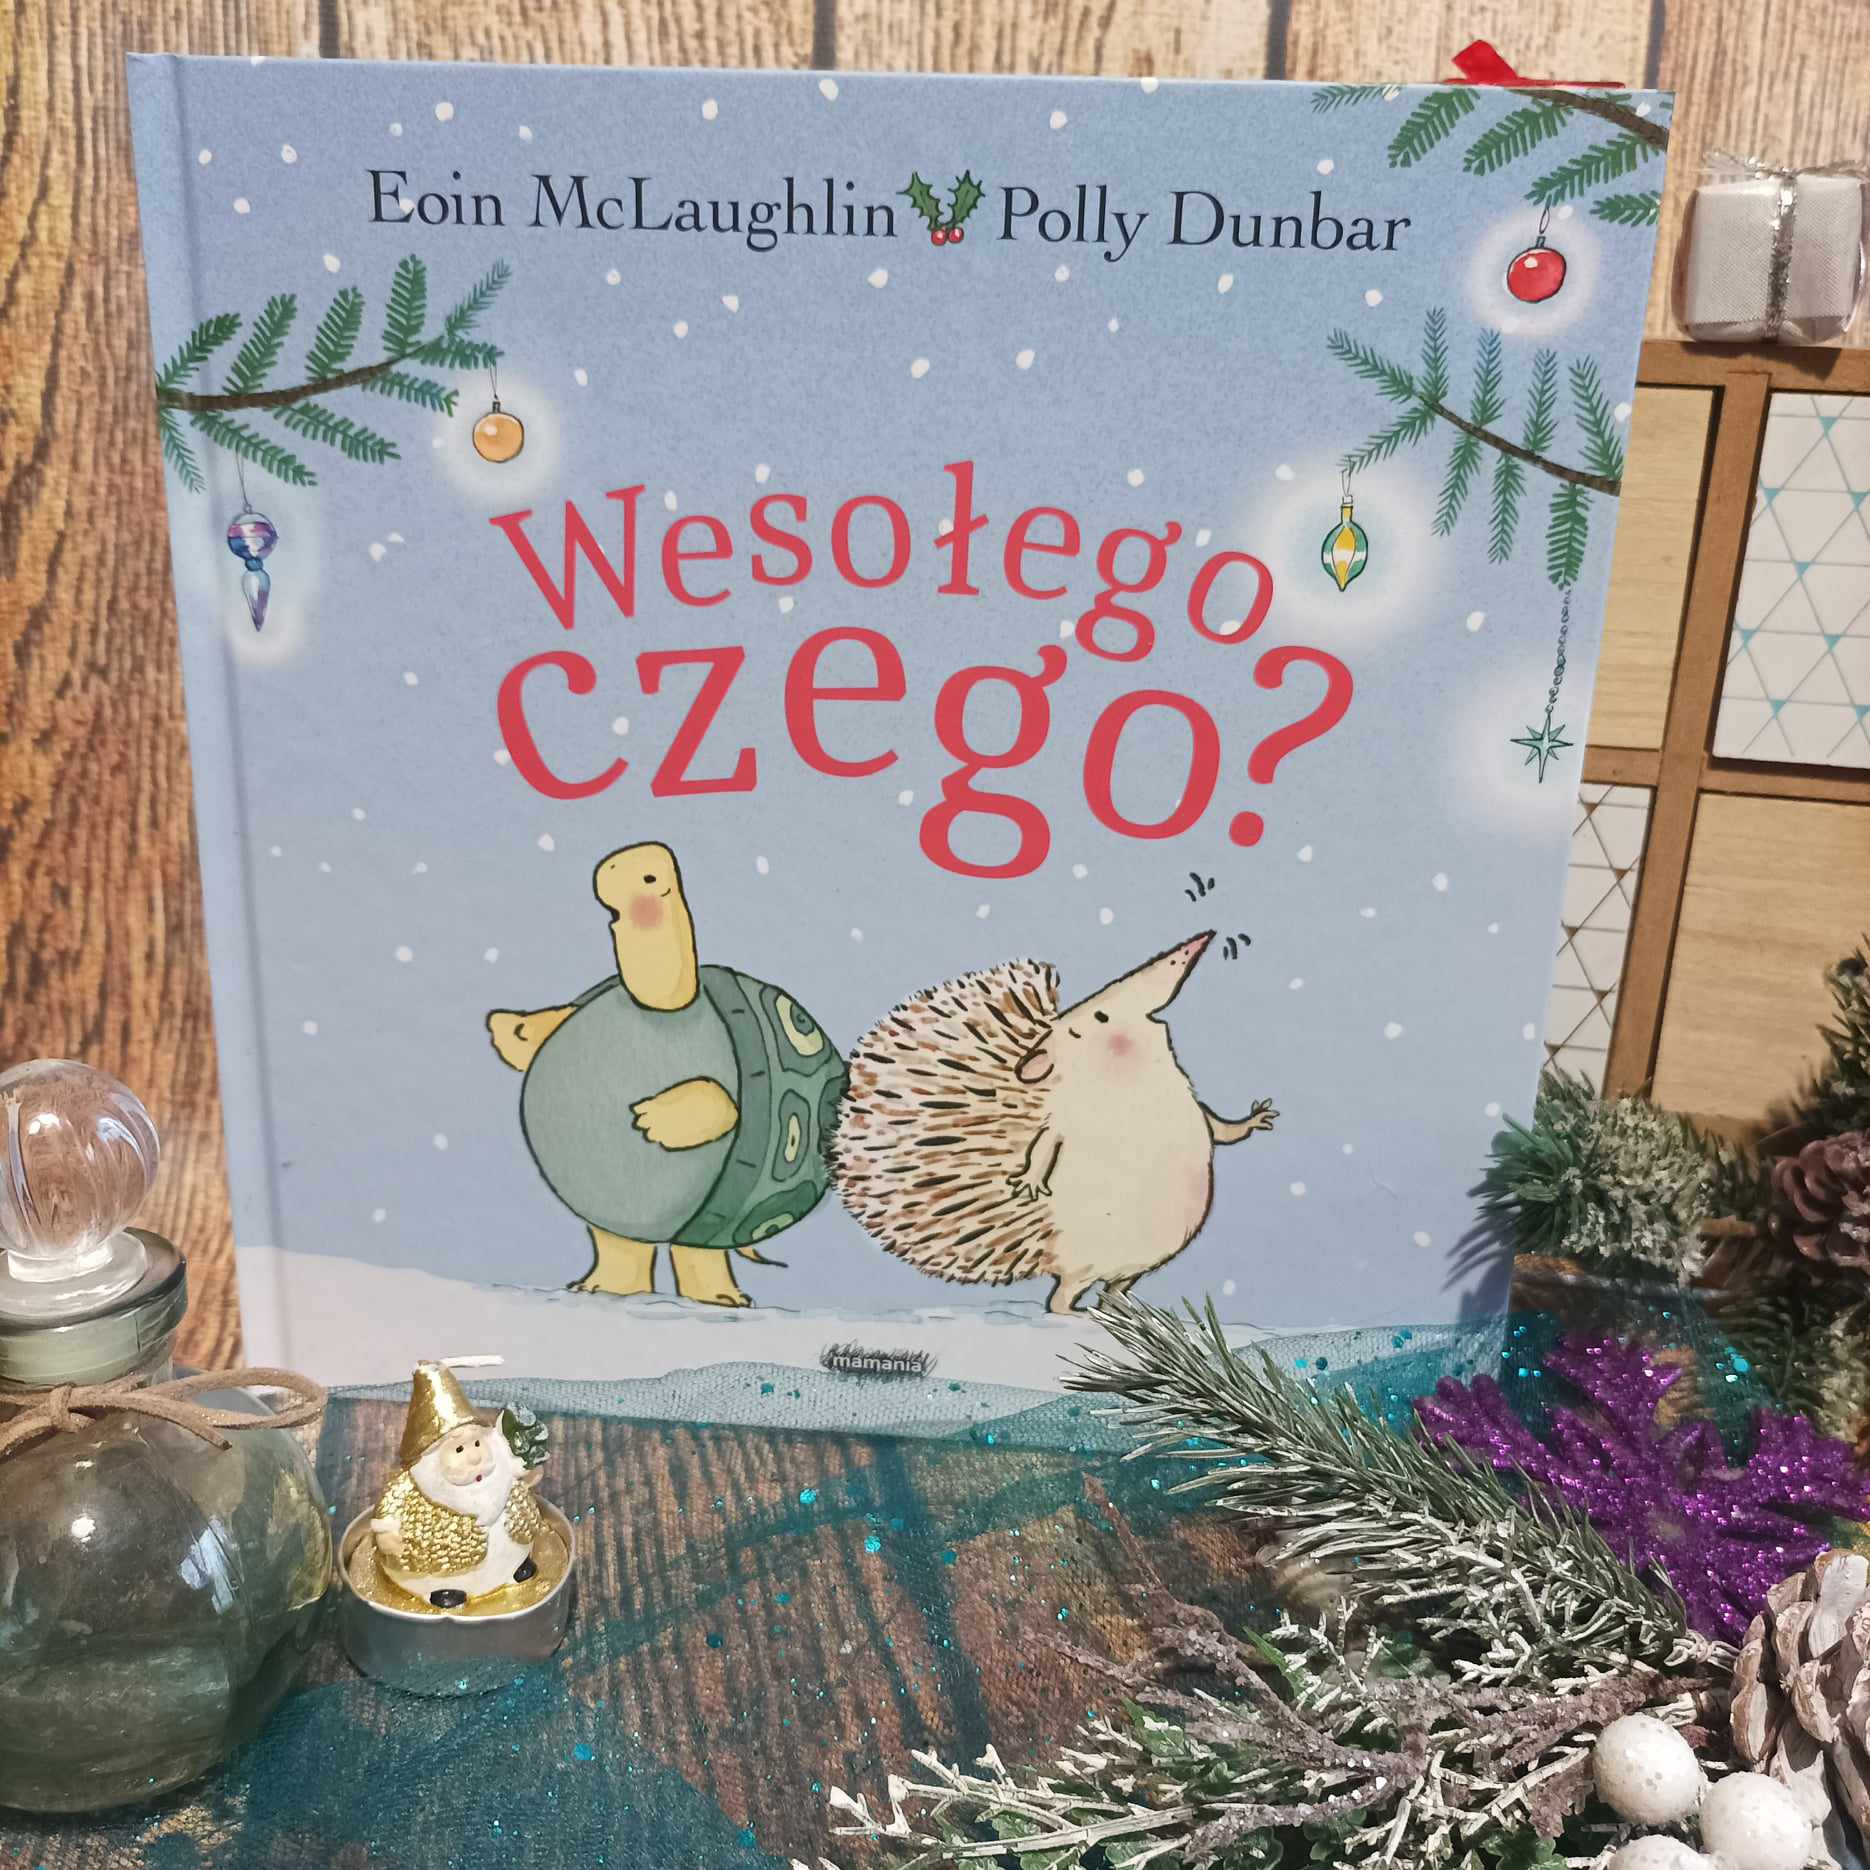 You are currently viewing Wesołego czego? Eoin McLaughlin [ChristmasBooks]